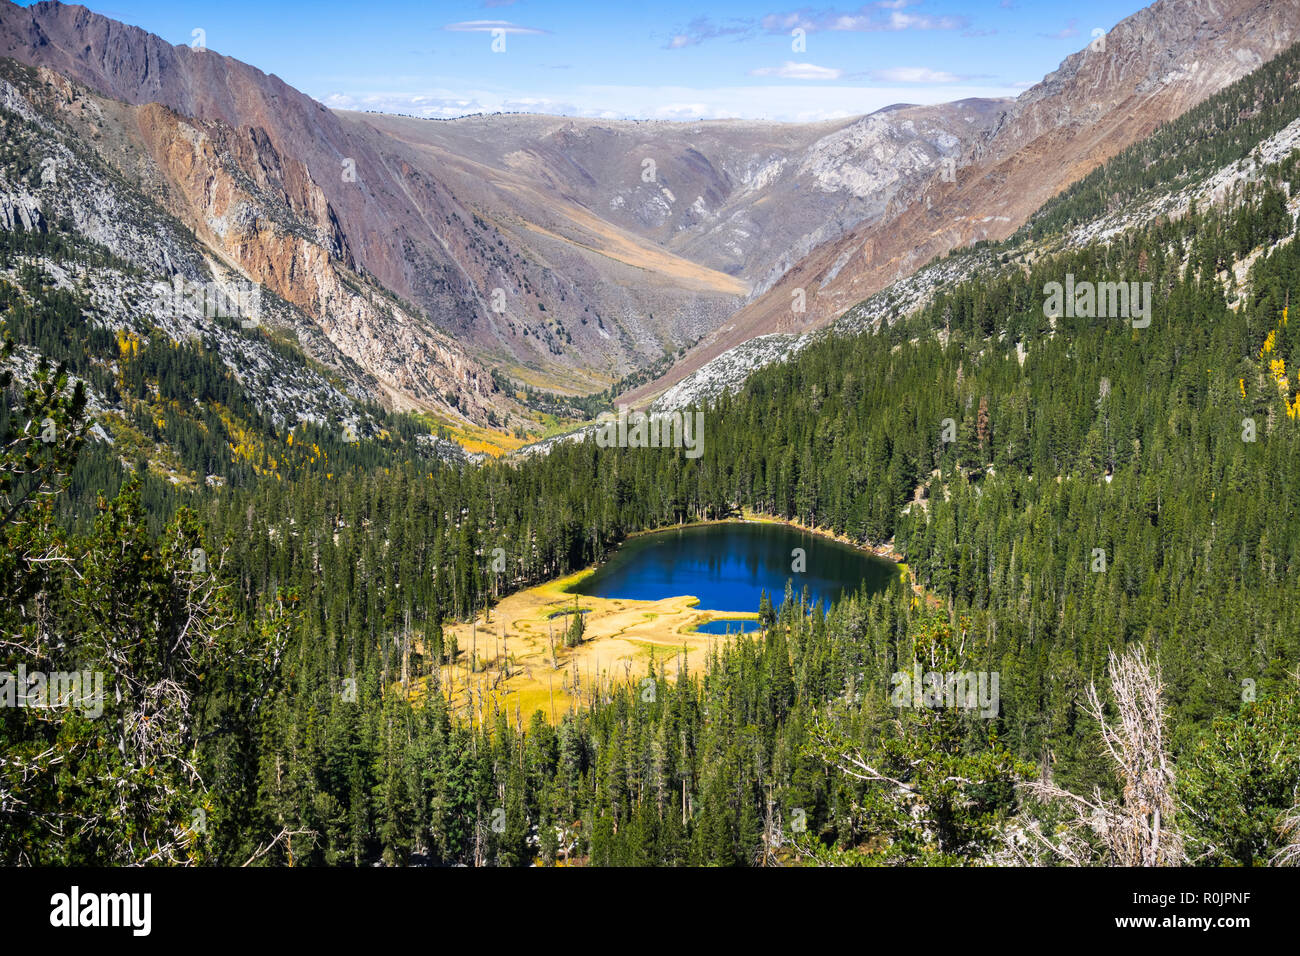 Aerial view Grass Lake surrounded by evergreen forests in the Eastern Sierra mountains, California Stock Photo